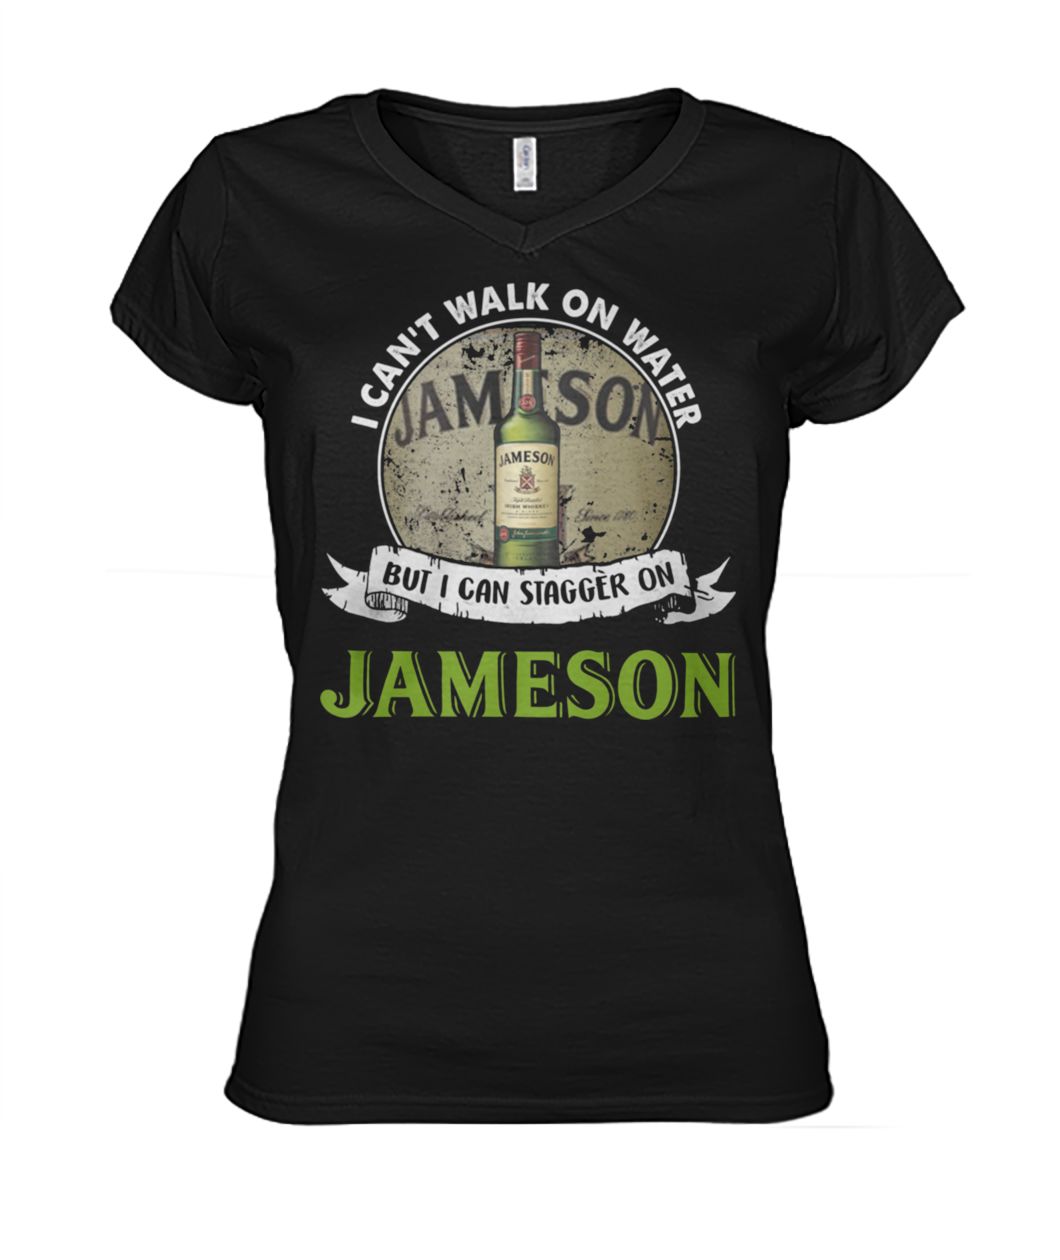 I can't walk on water but I can stagger on jameson women's v-neck